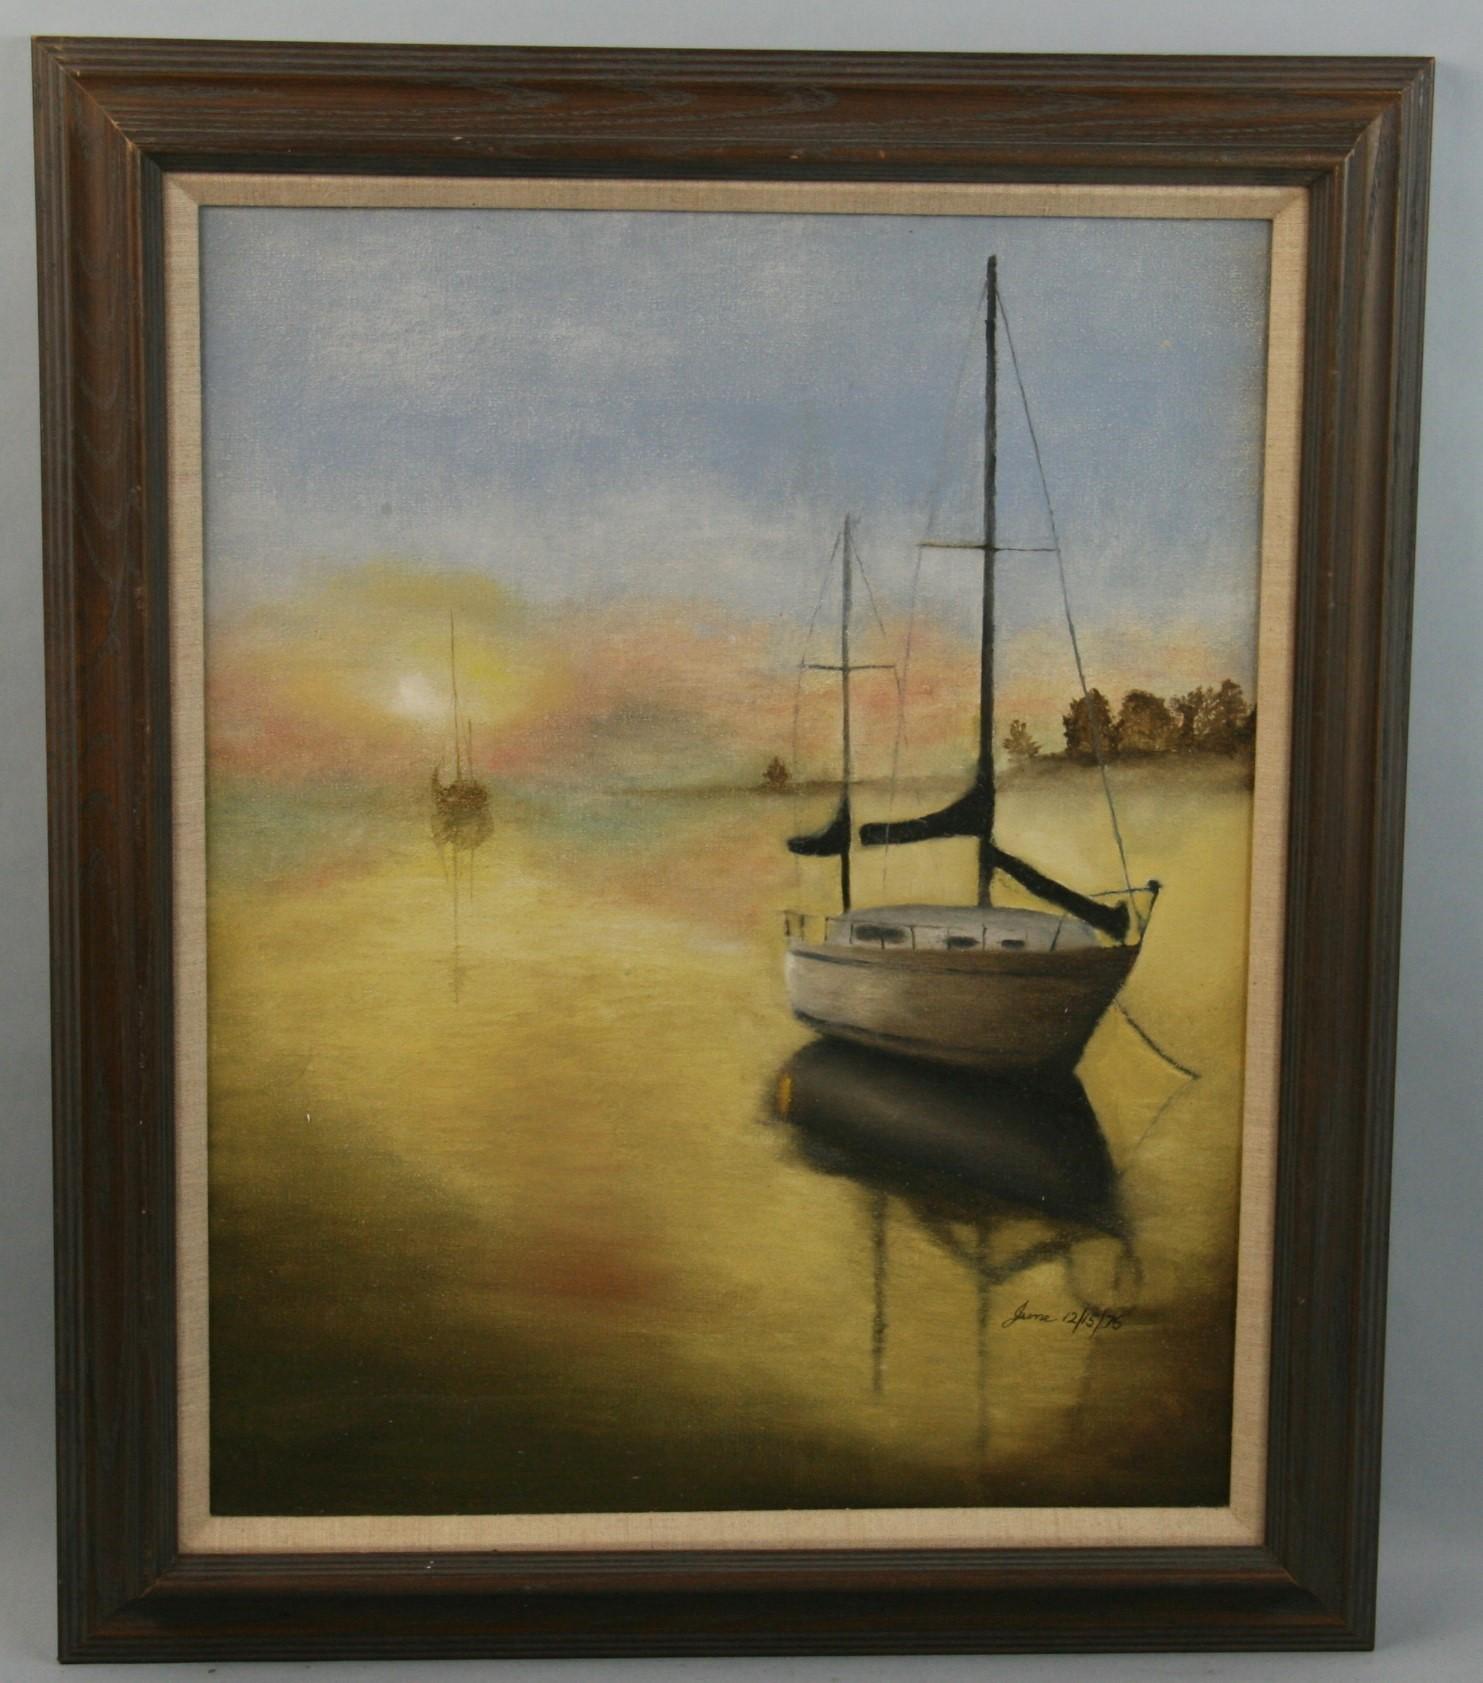  Sailboats into Misty Sunset 1975 - Painting by June